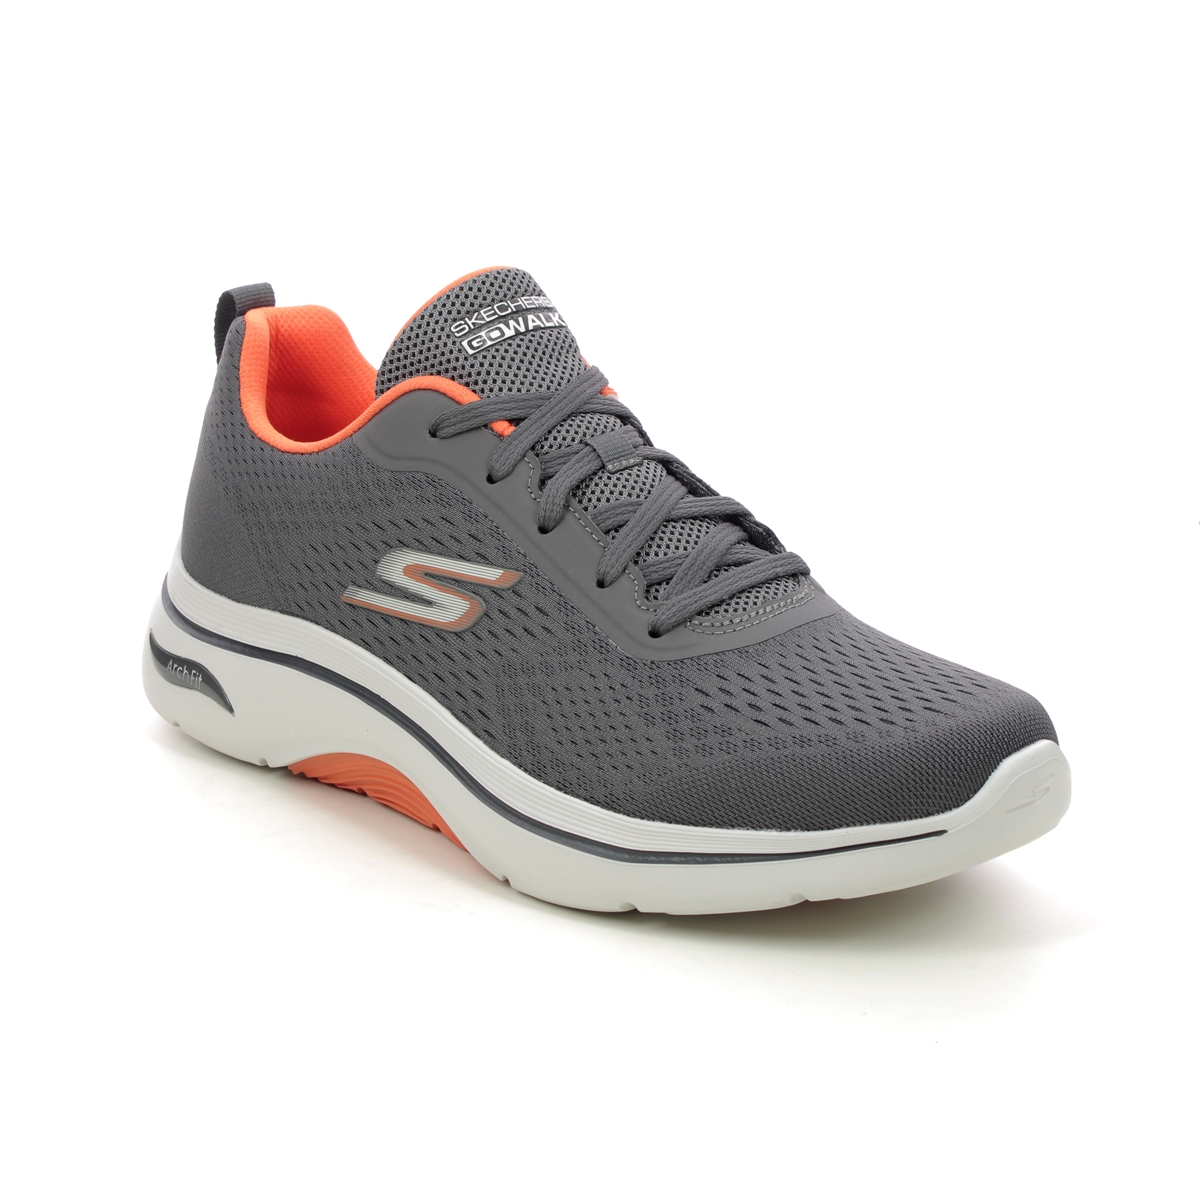 Skechers Arch Fit 2 Go Walk 7 CCOR Charcoal grey Mens trainers 216516 in a Plain Textile in Size 11